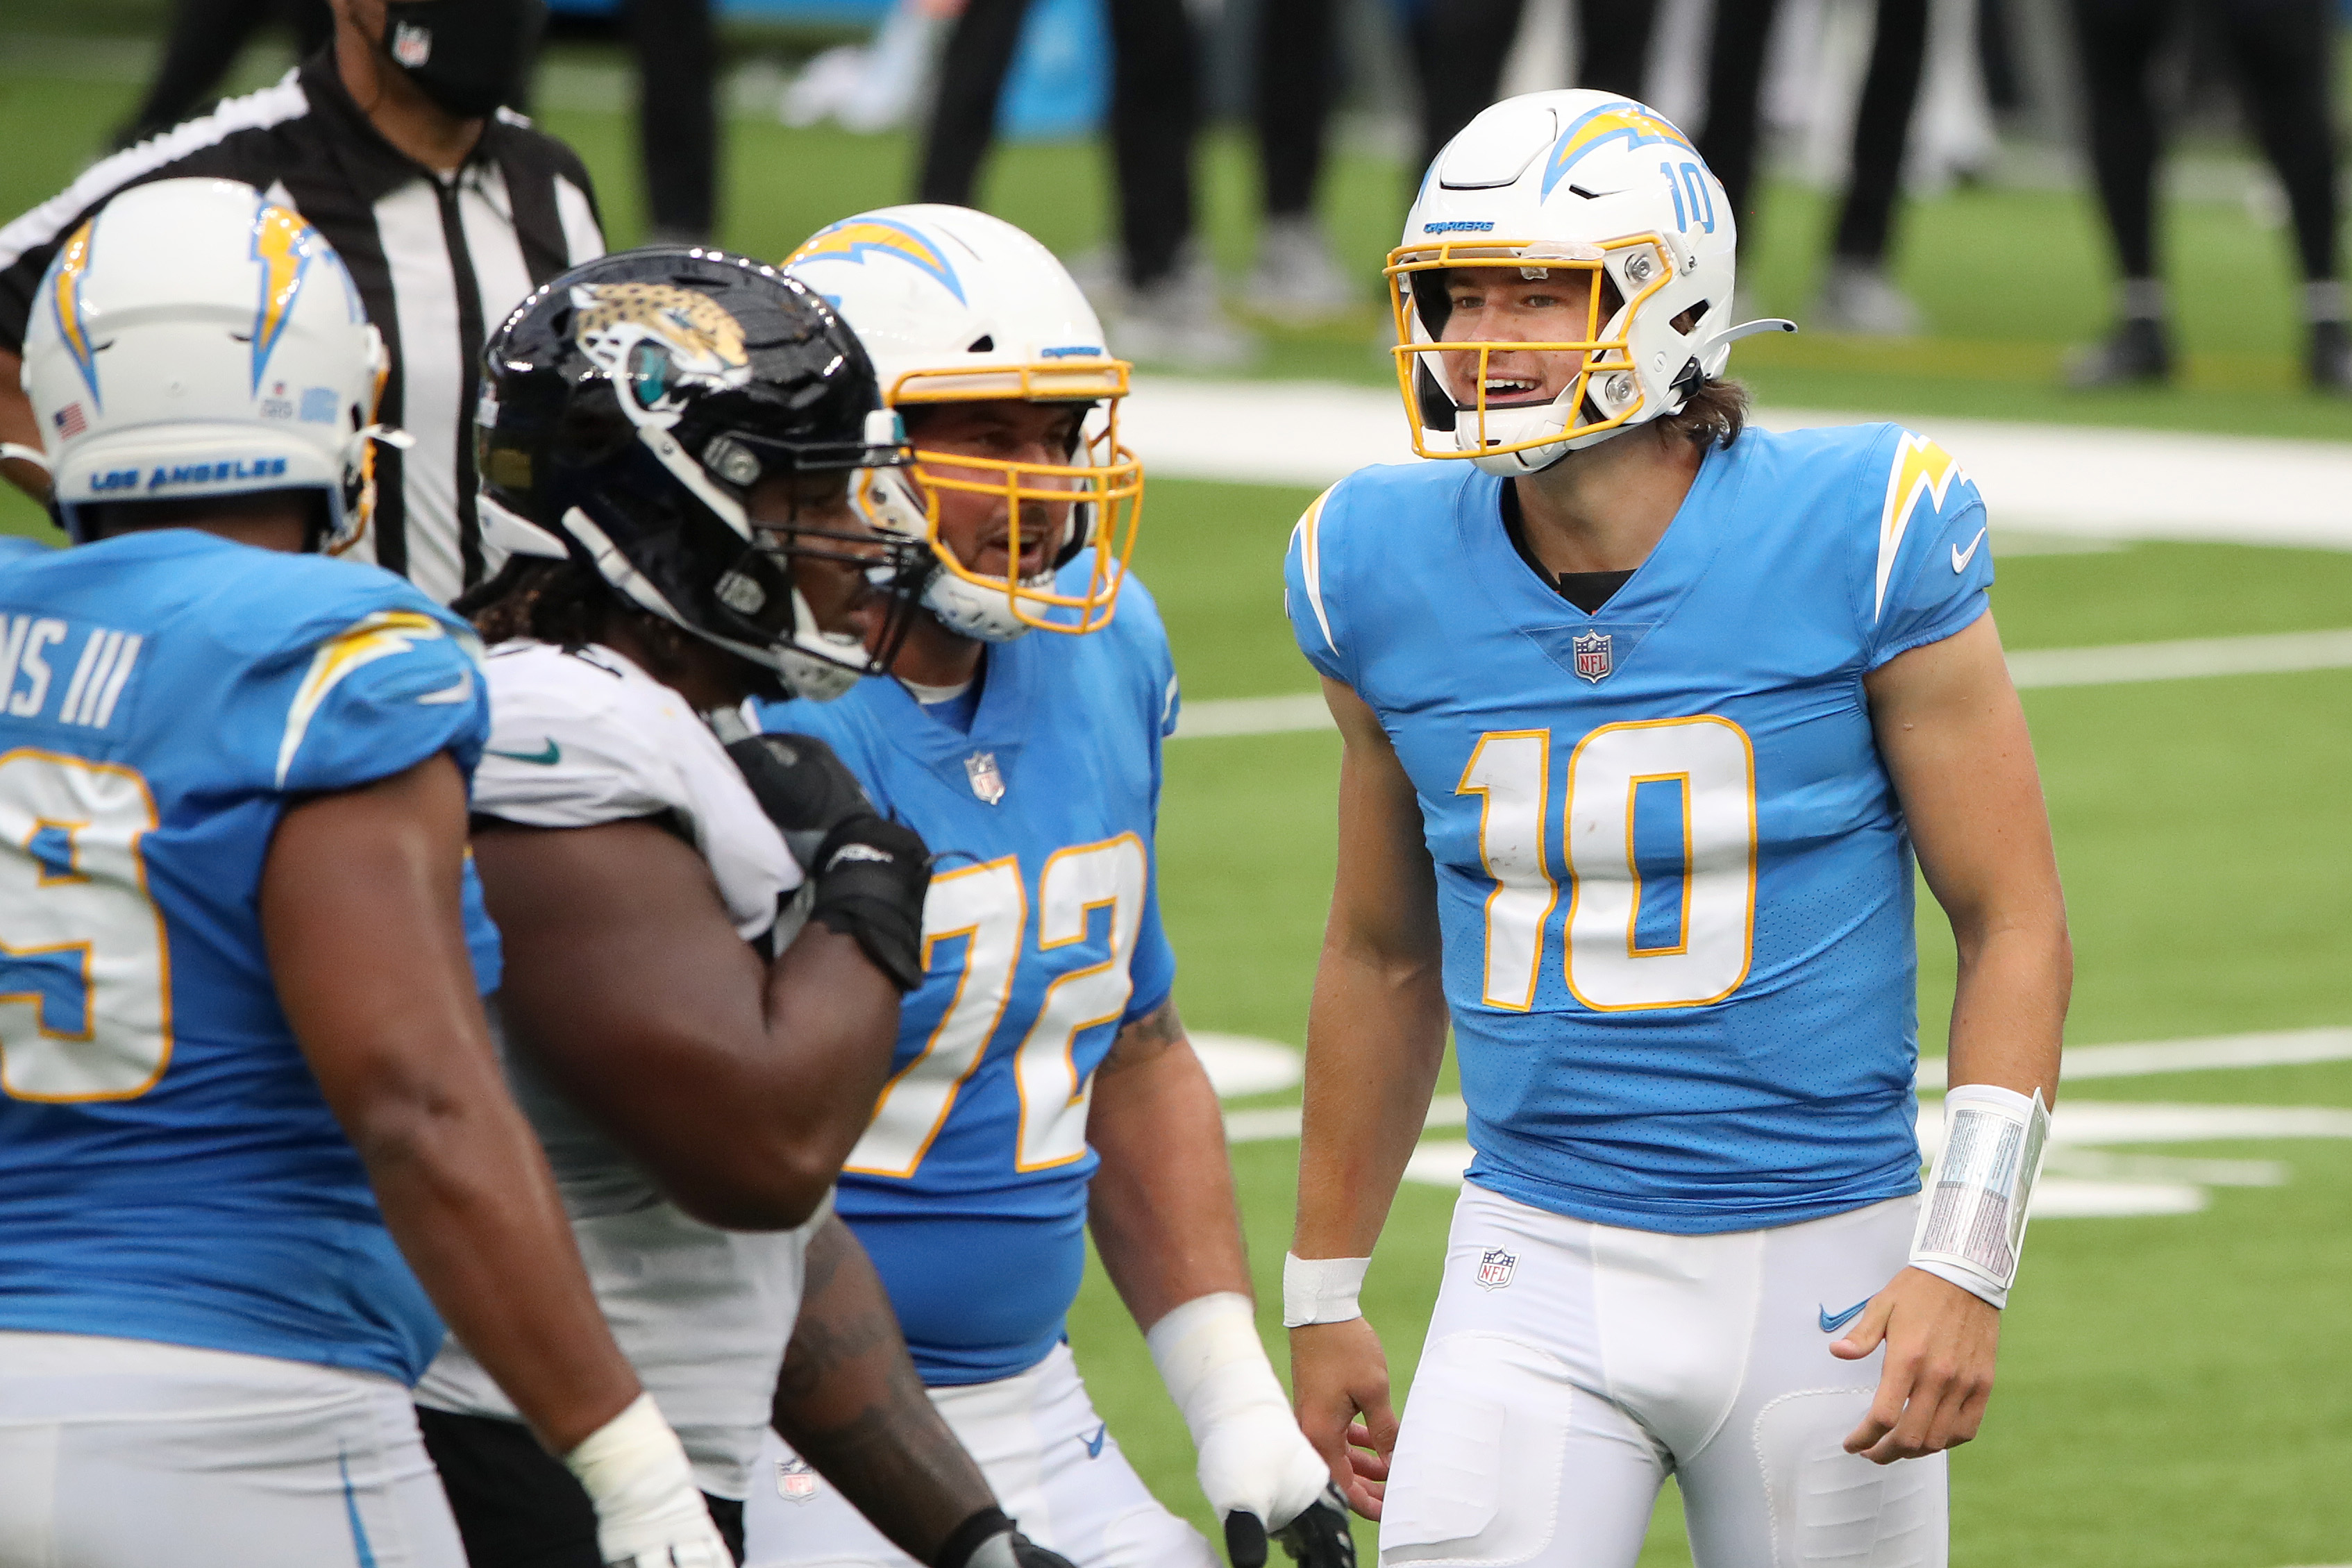 Chargers New Uniforms & Their Uniform History - Playmaker HQ